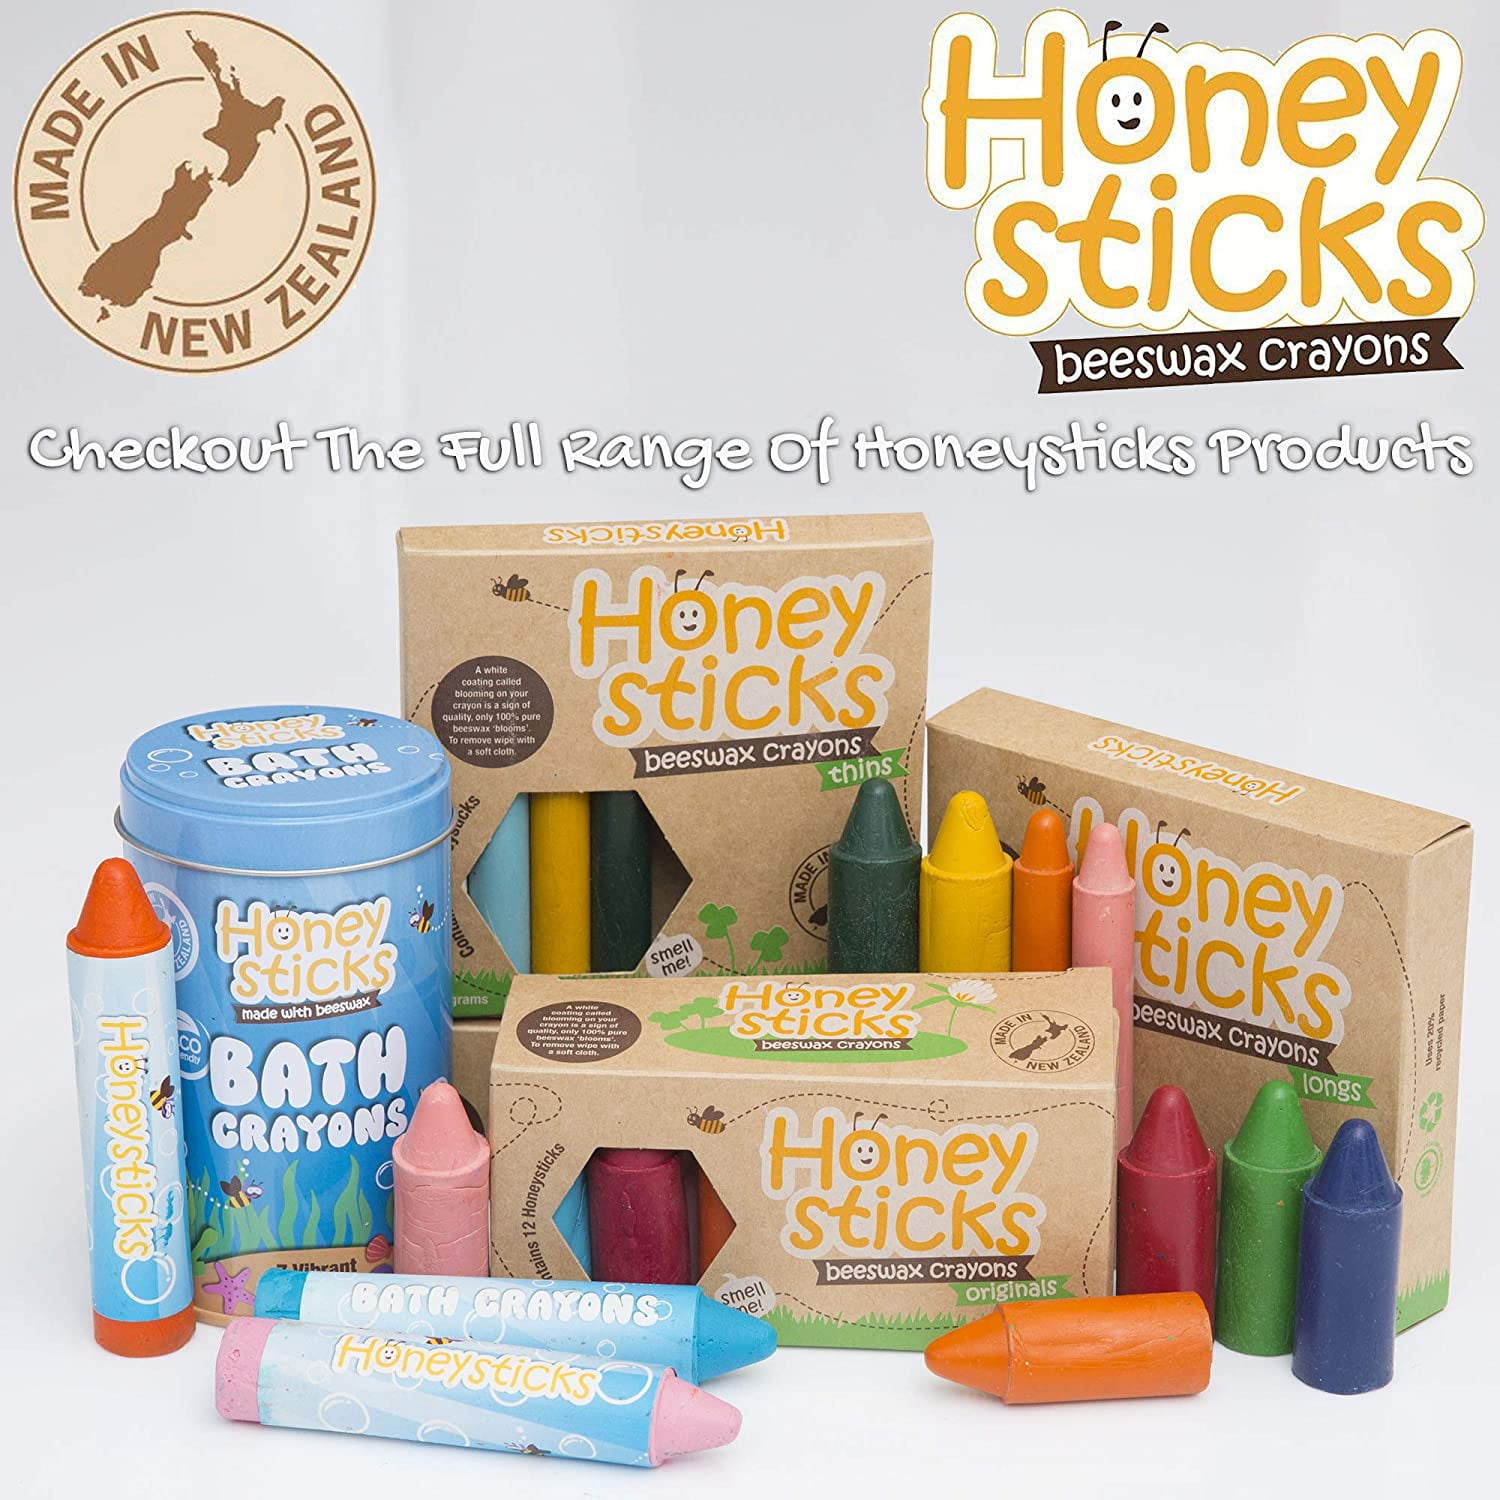 Honeysticks 100% Pure Beeswax Crayons and Coloring Book Gift Pack - Non Toxic Crayons (8 Pack) Designed for Little Hands Plus A Premium Quality